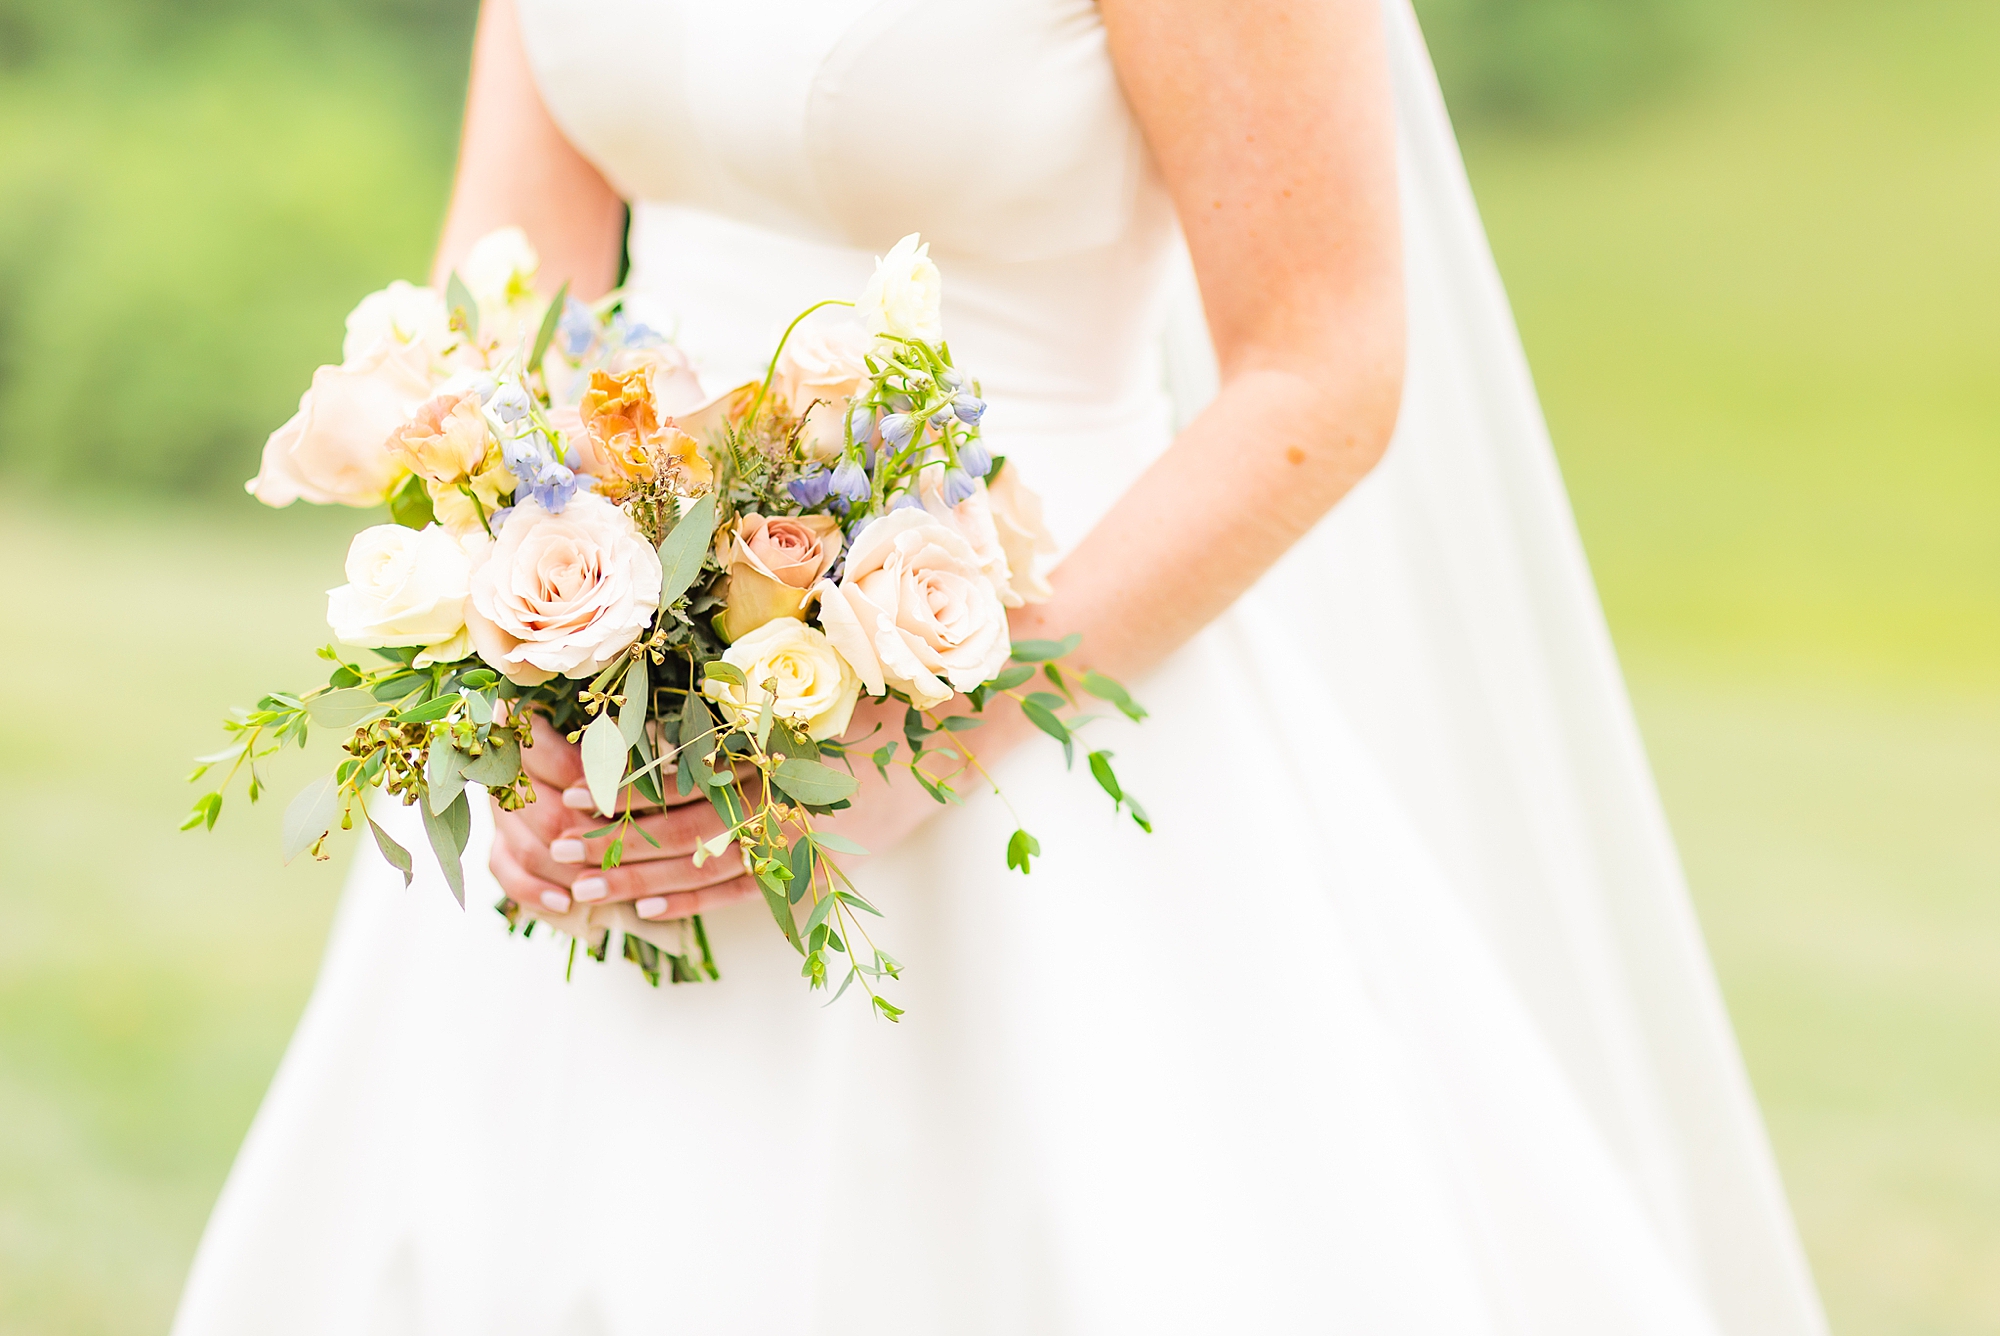 bride holds bouquet of light colored flowers